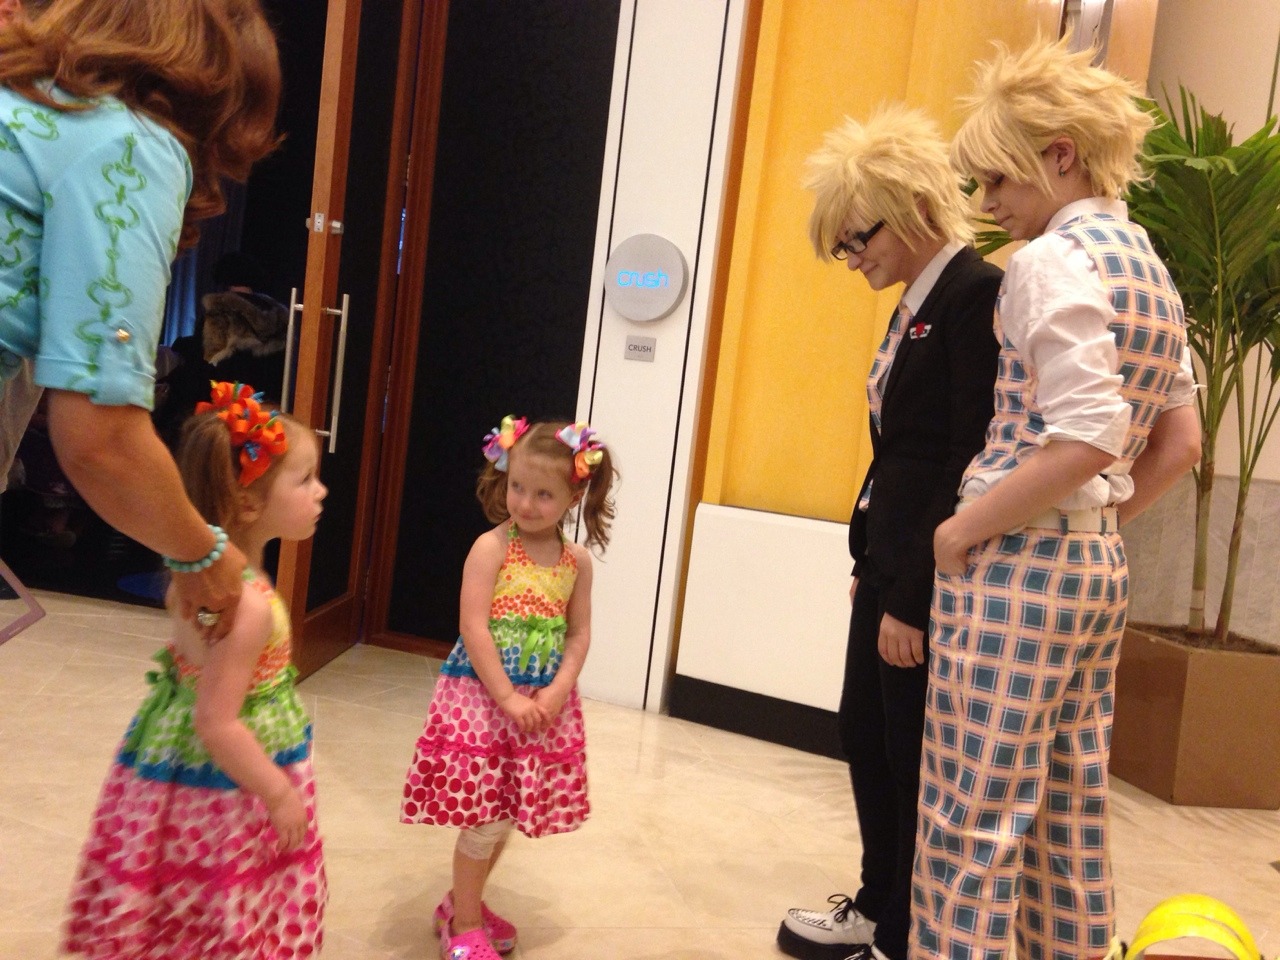 stella-rogers:  In the lobby of the CTcon hotel on Saturday, there was a family with